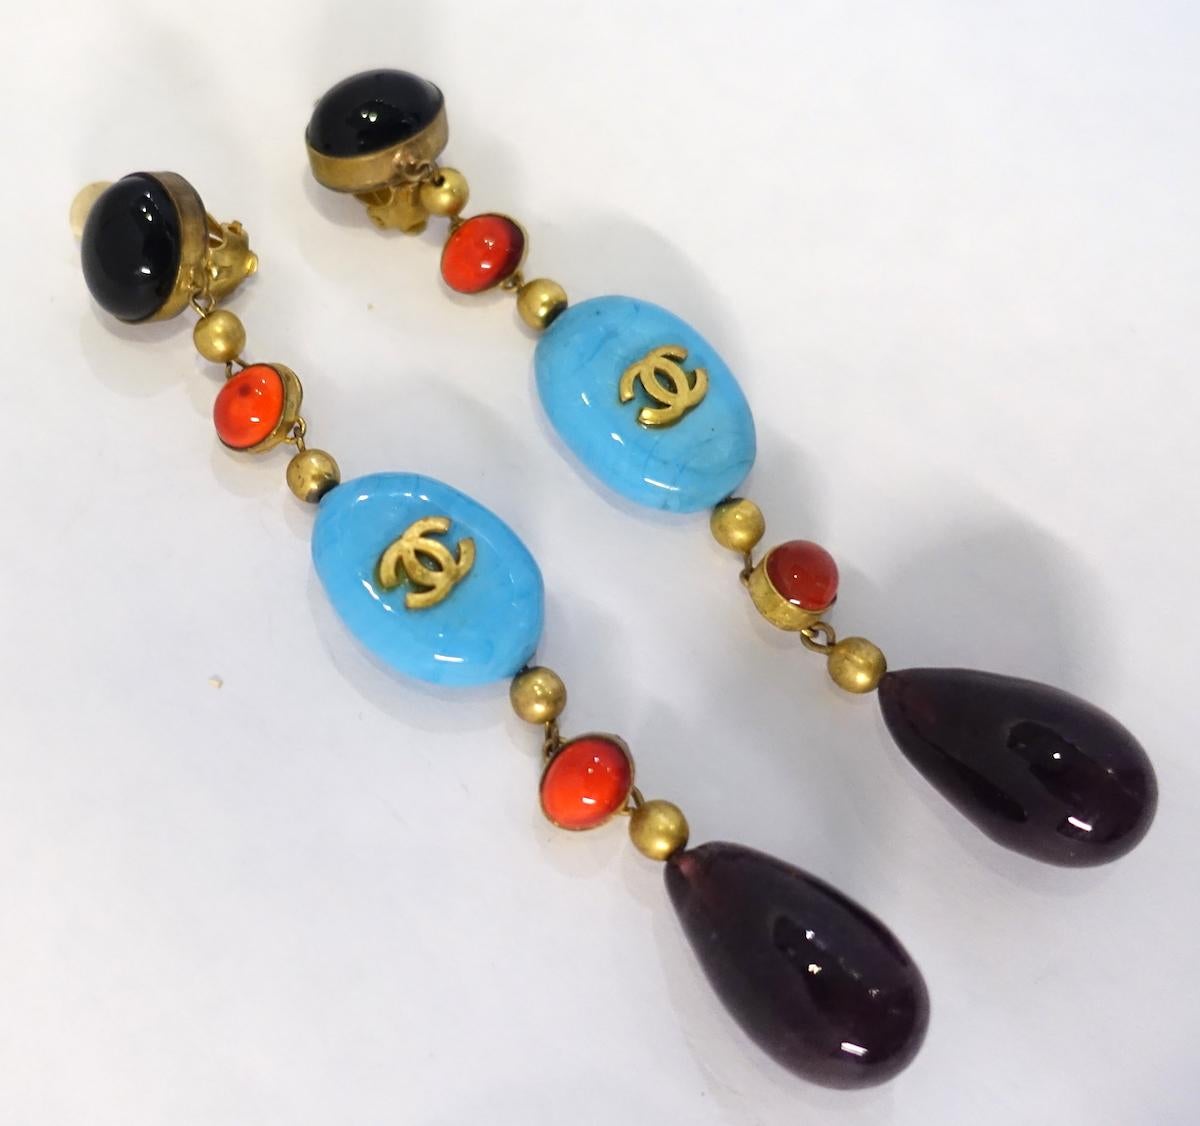 These vintage signed Chanel earrings are amazing and looks like they were made for the runway. They have the amethyst color Gripoix button tops. Dangling down is faux coral Gripoix glass and faux turquoise Gripoix with the double “Cs” in the center